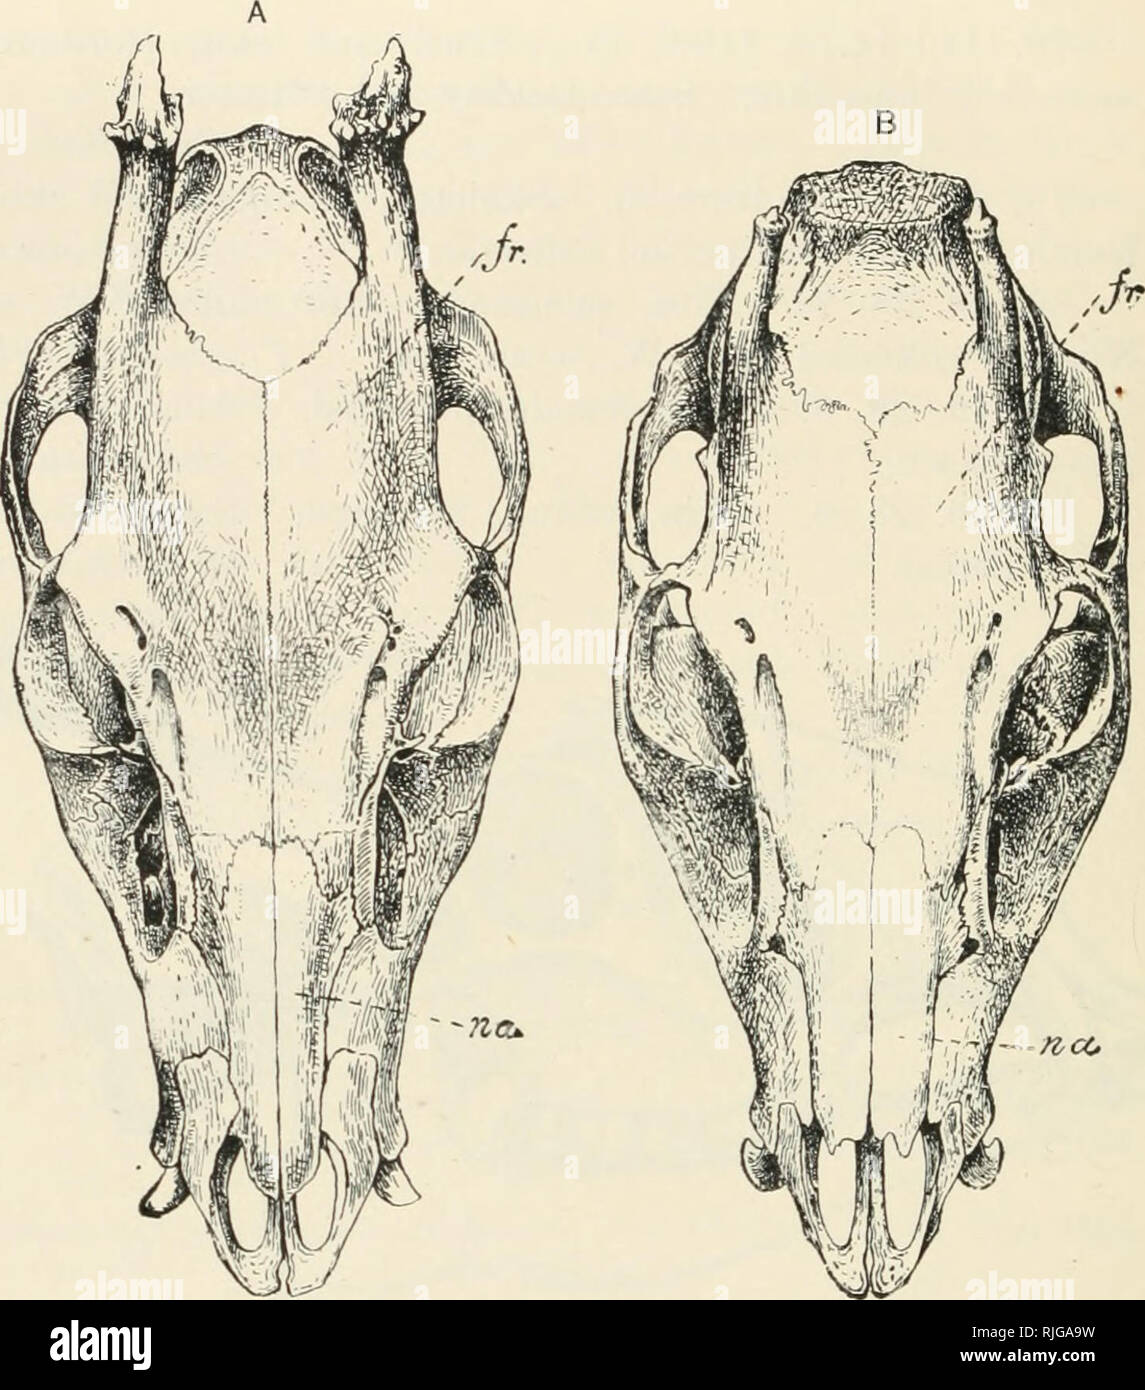 Catalogue of the ungulate mammals in the British Museum (Natural History).  British Museum (Natural History); Ungulates. CATAIiOGtfE OF UNGULATES. Fig.  8.—Front View of Skulls op Nixgpo (A), and Ichang Tuftkd Deer (